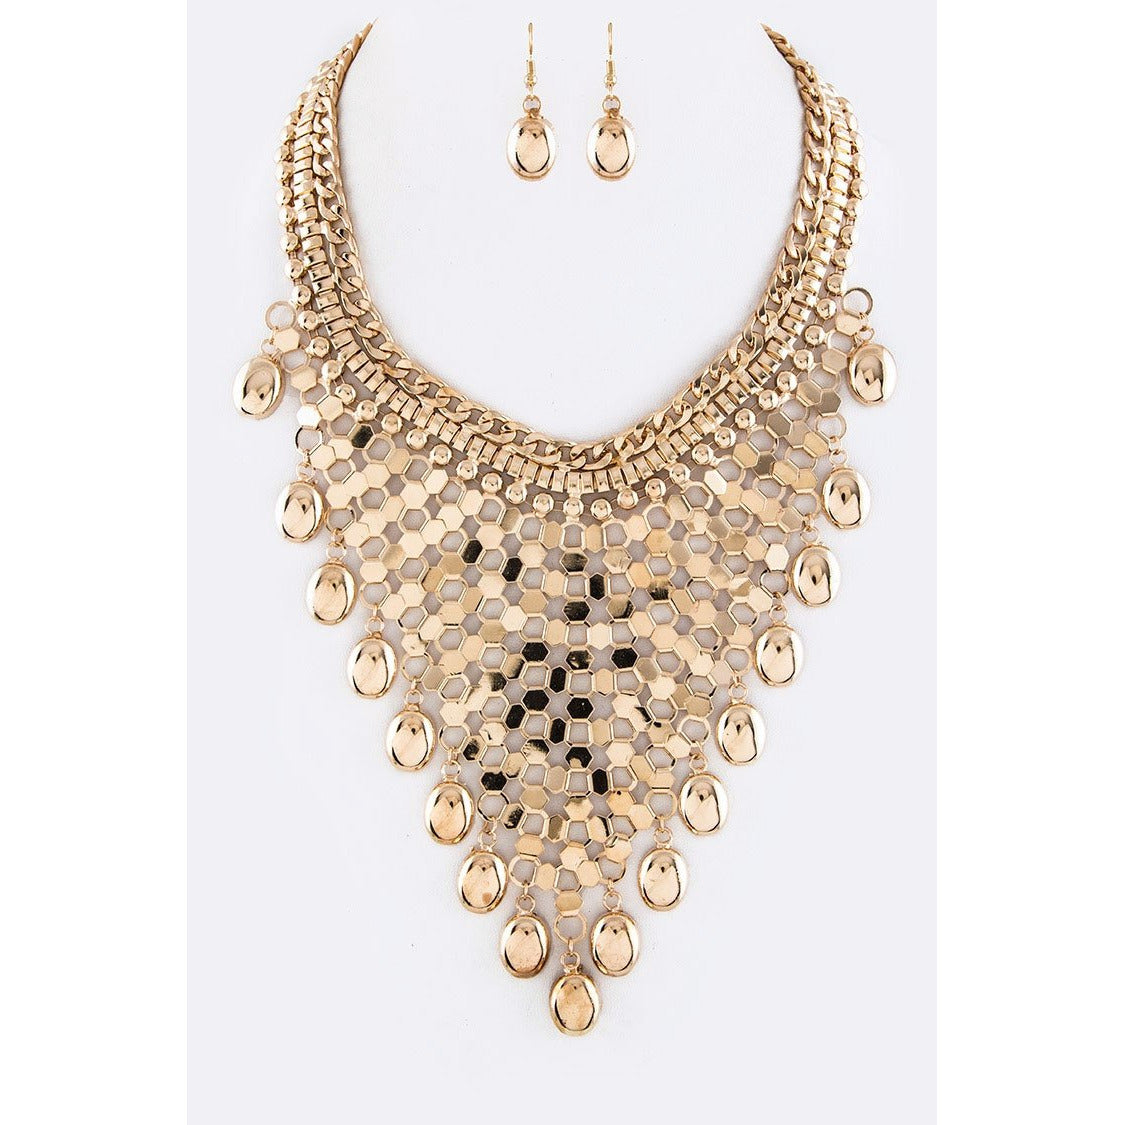 Honeycomb Chain Bib Necklace Set (Gold) - Ariya's Apparel and Accessories